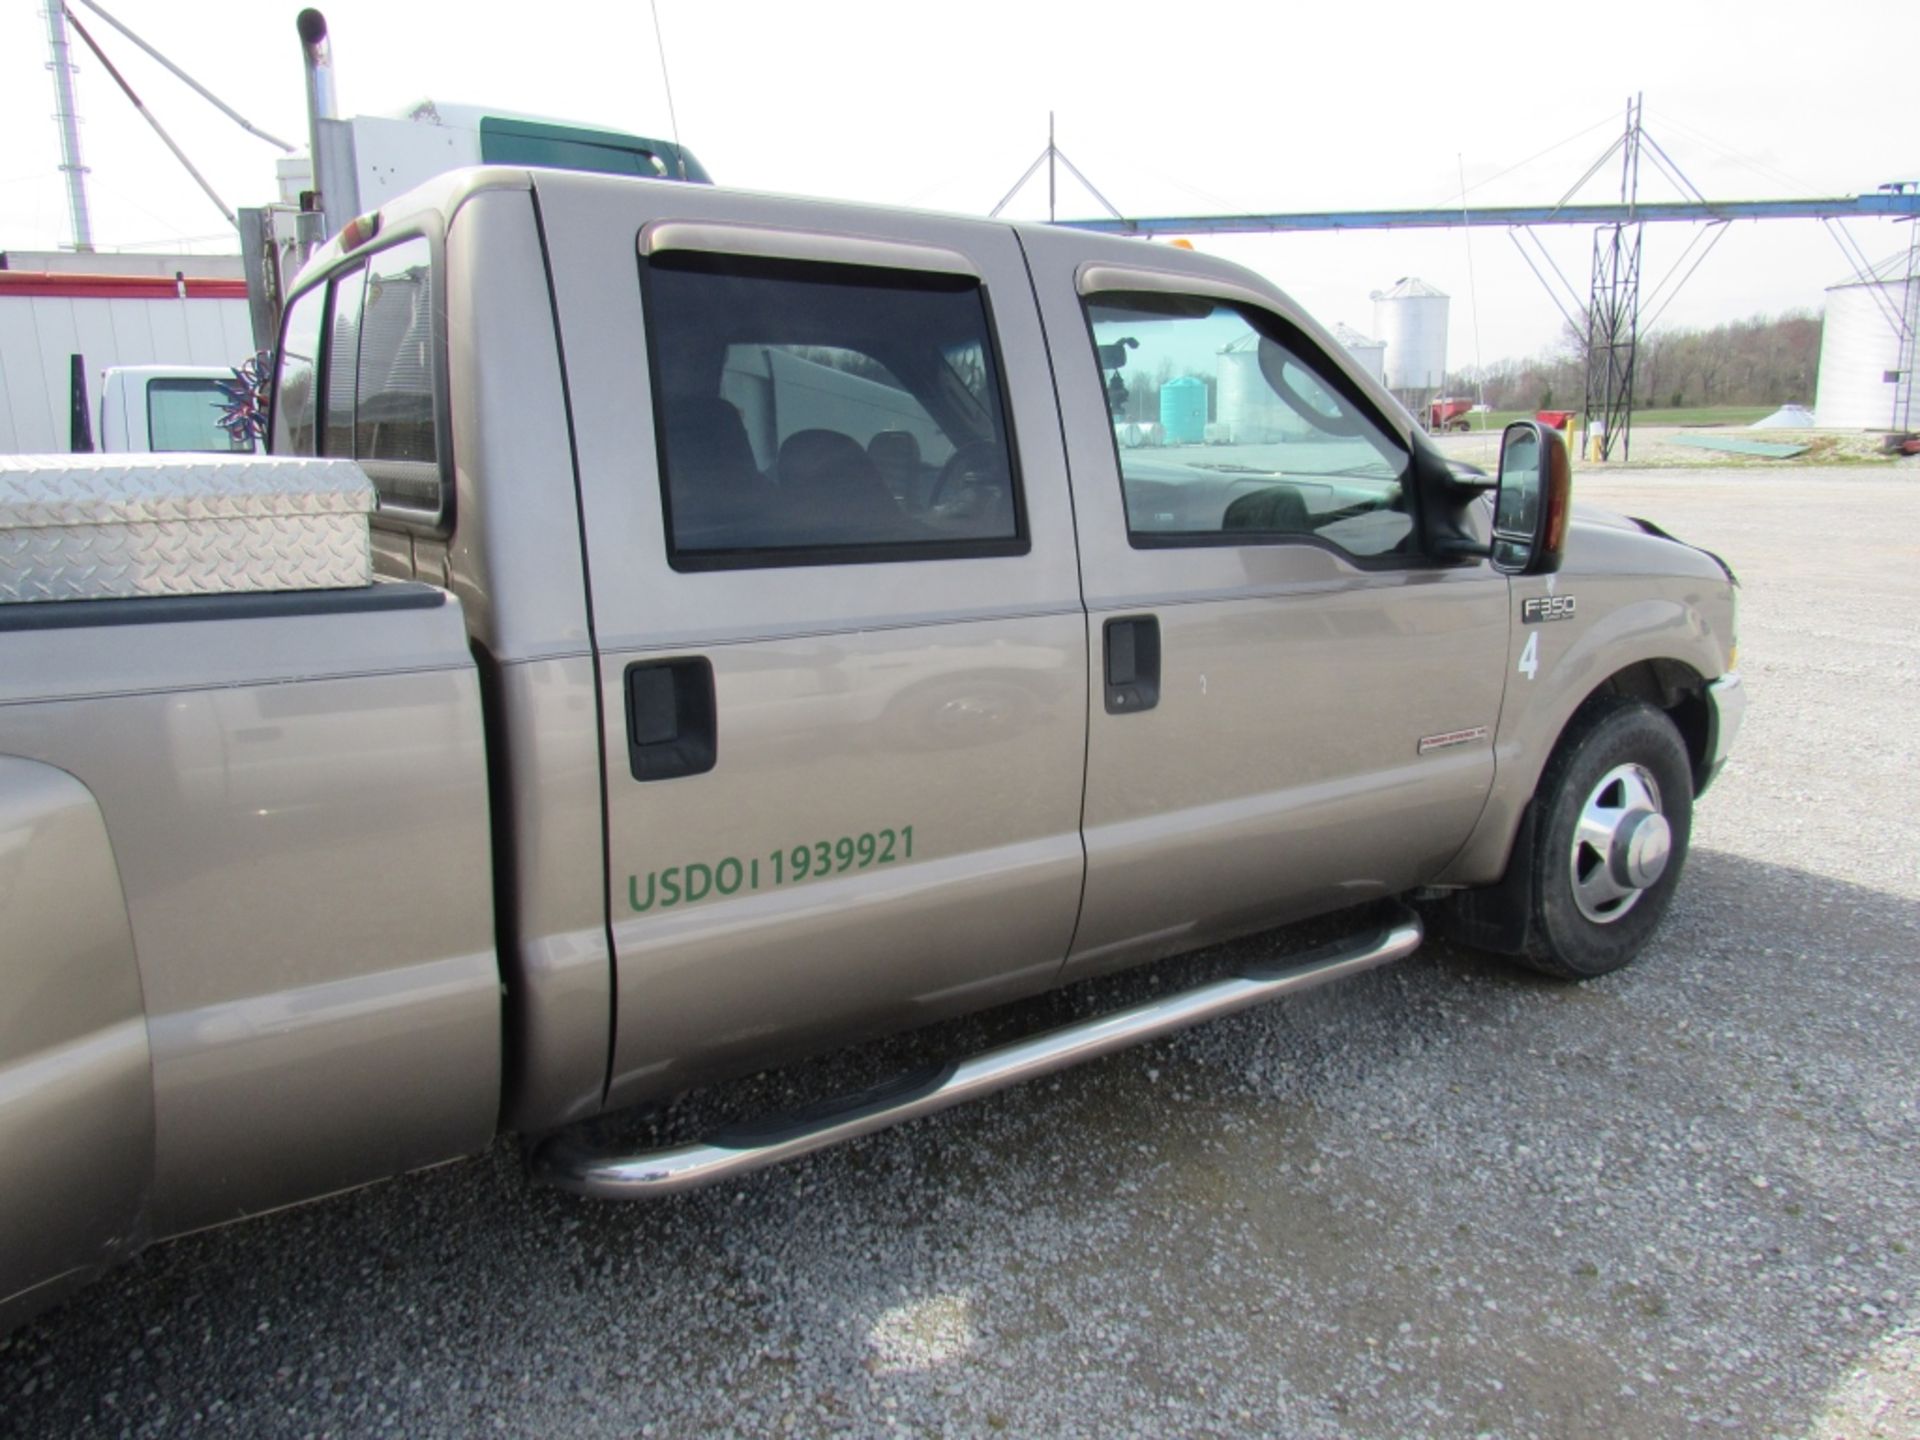 2004 Ford F-350 XLT 2wd 6.0L Powerstroke Diesel Engine - Image 19 of 22